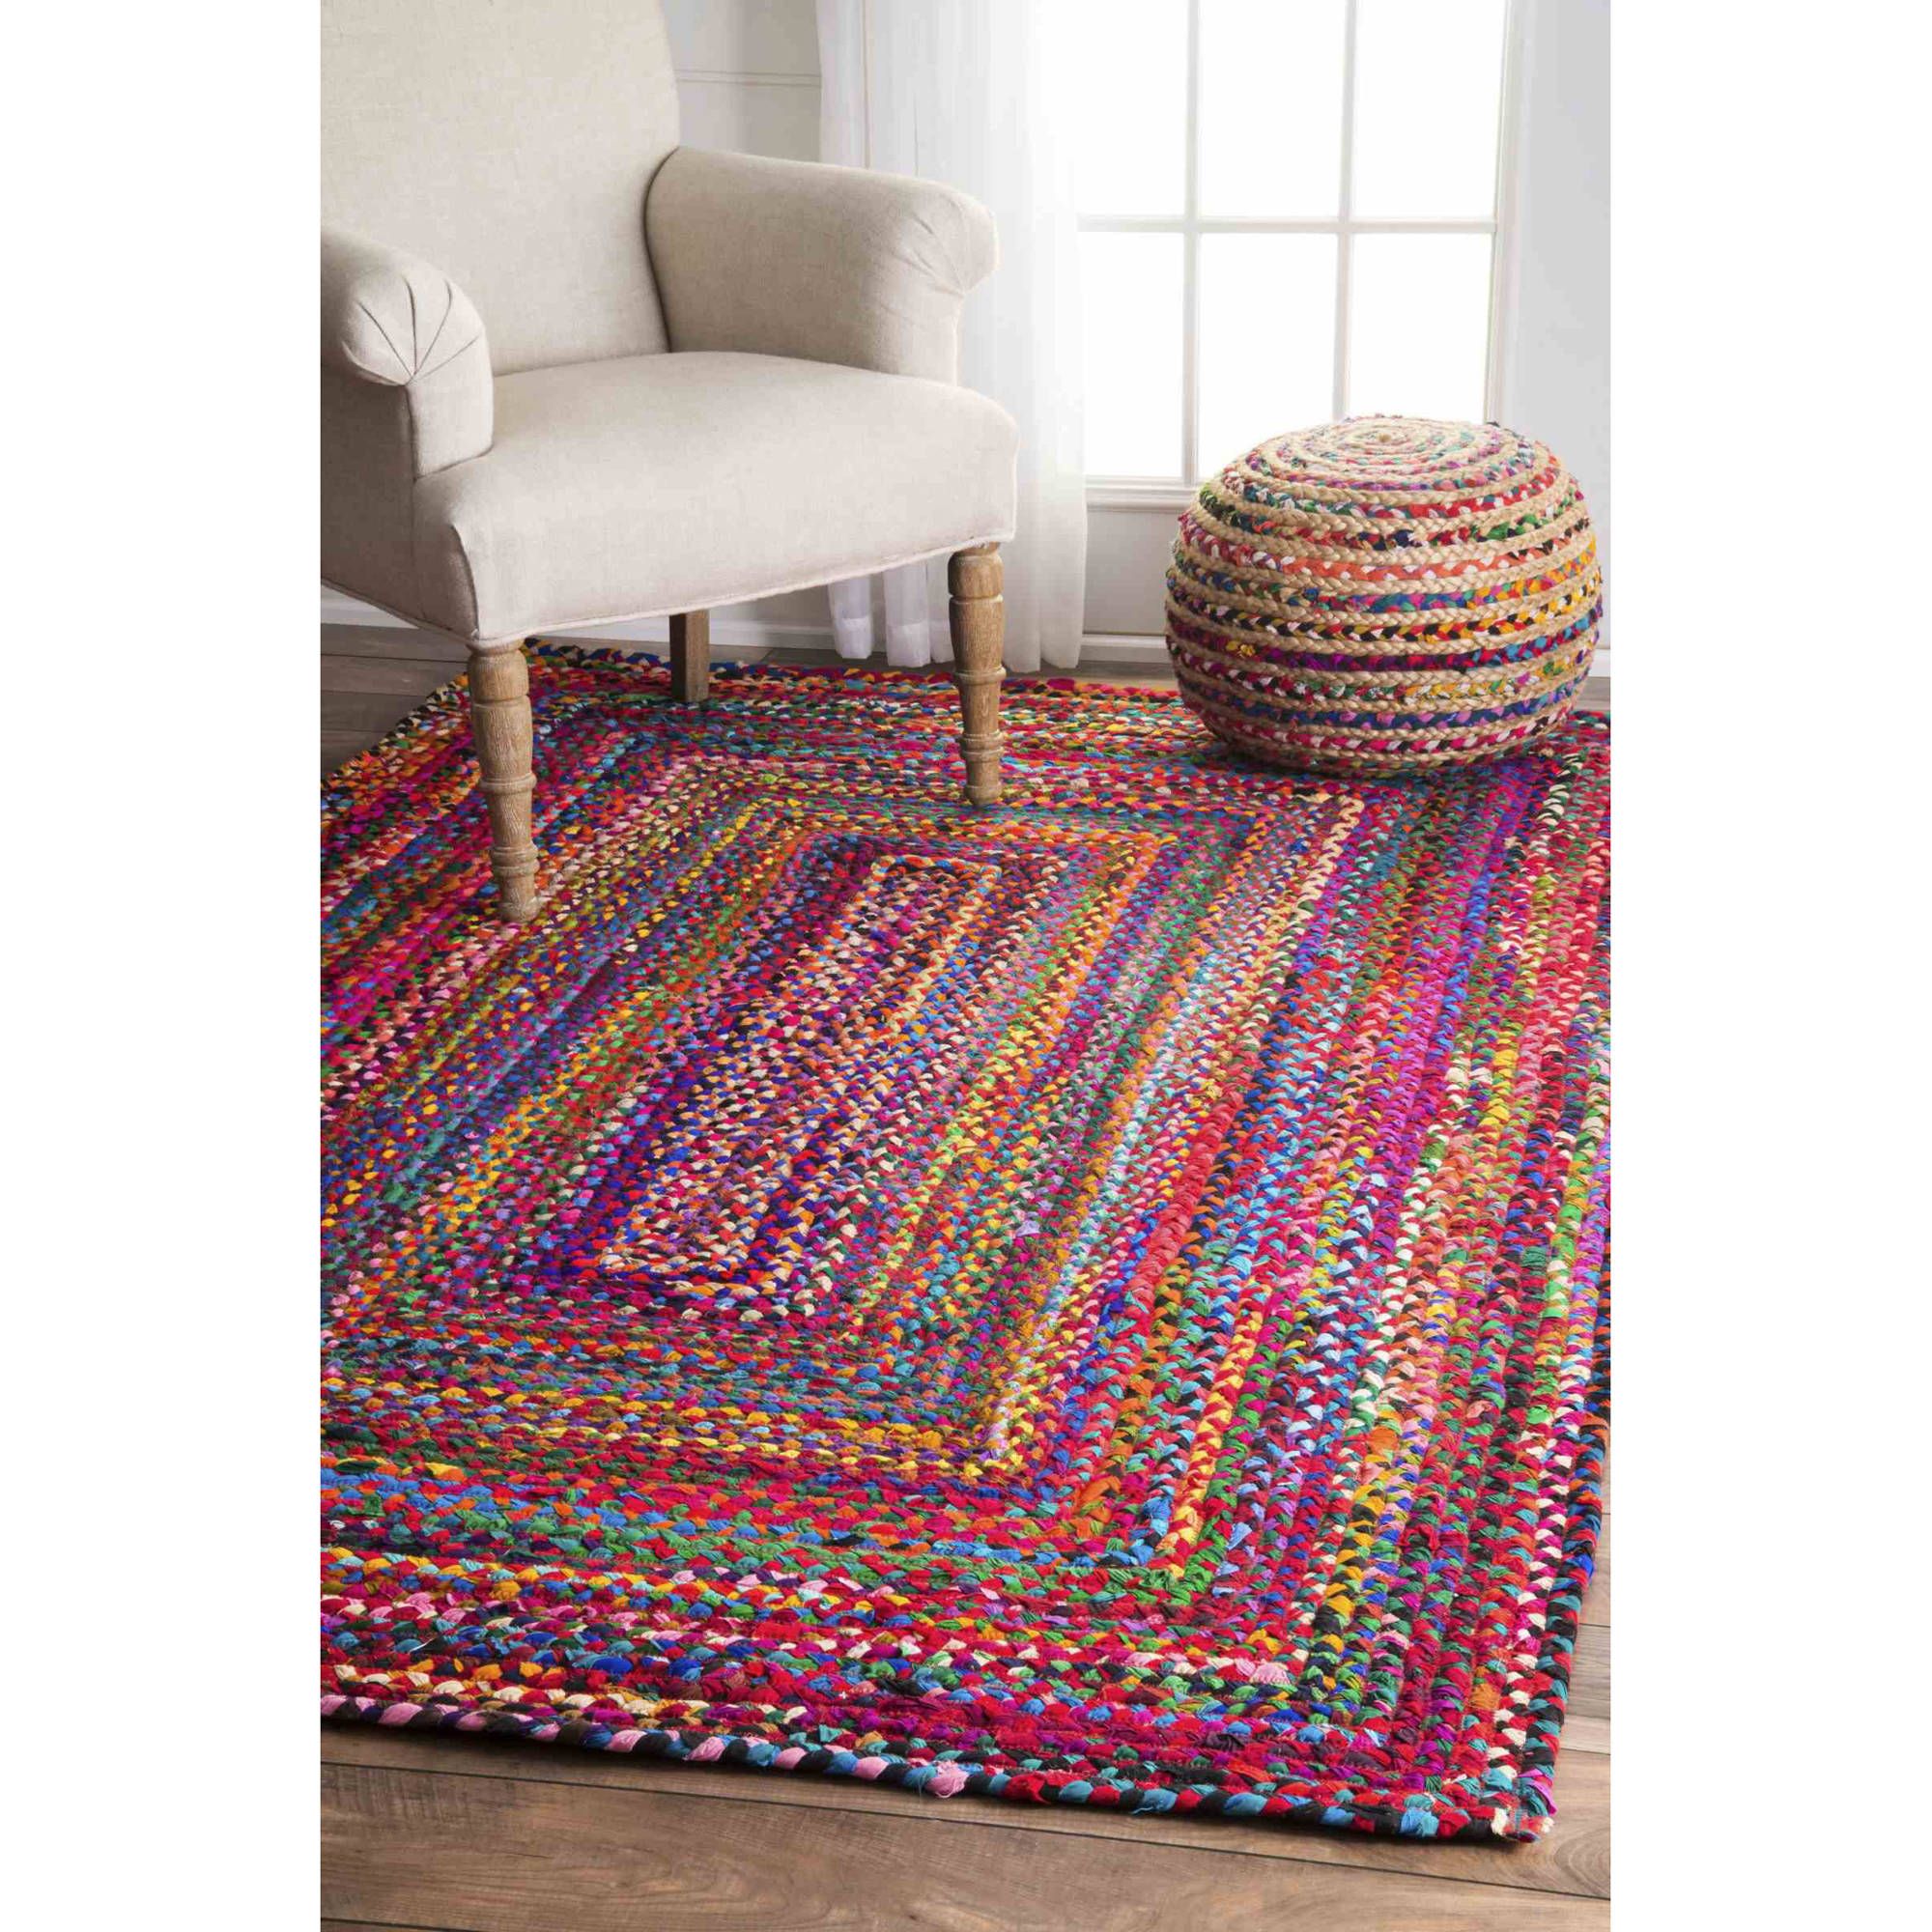 Nuloom Hand Braided Tammara Area Rug – Walmart Throughout Hand Woven Braided Rugs (View 12 of 15)